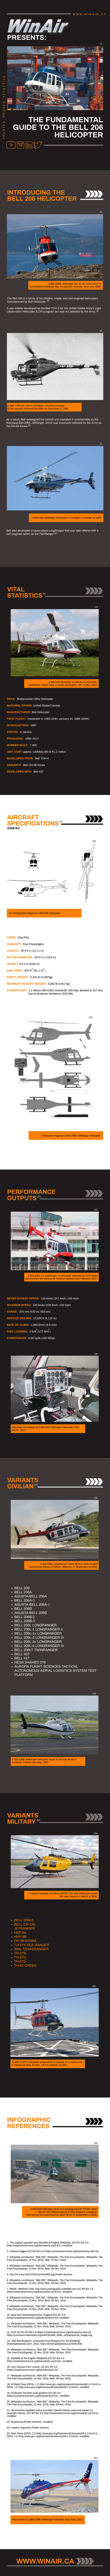 The Fundamental Guide to the Bell 206 Helicopter Infographic